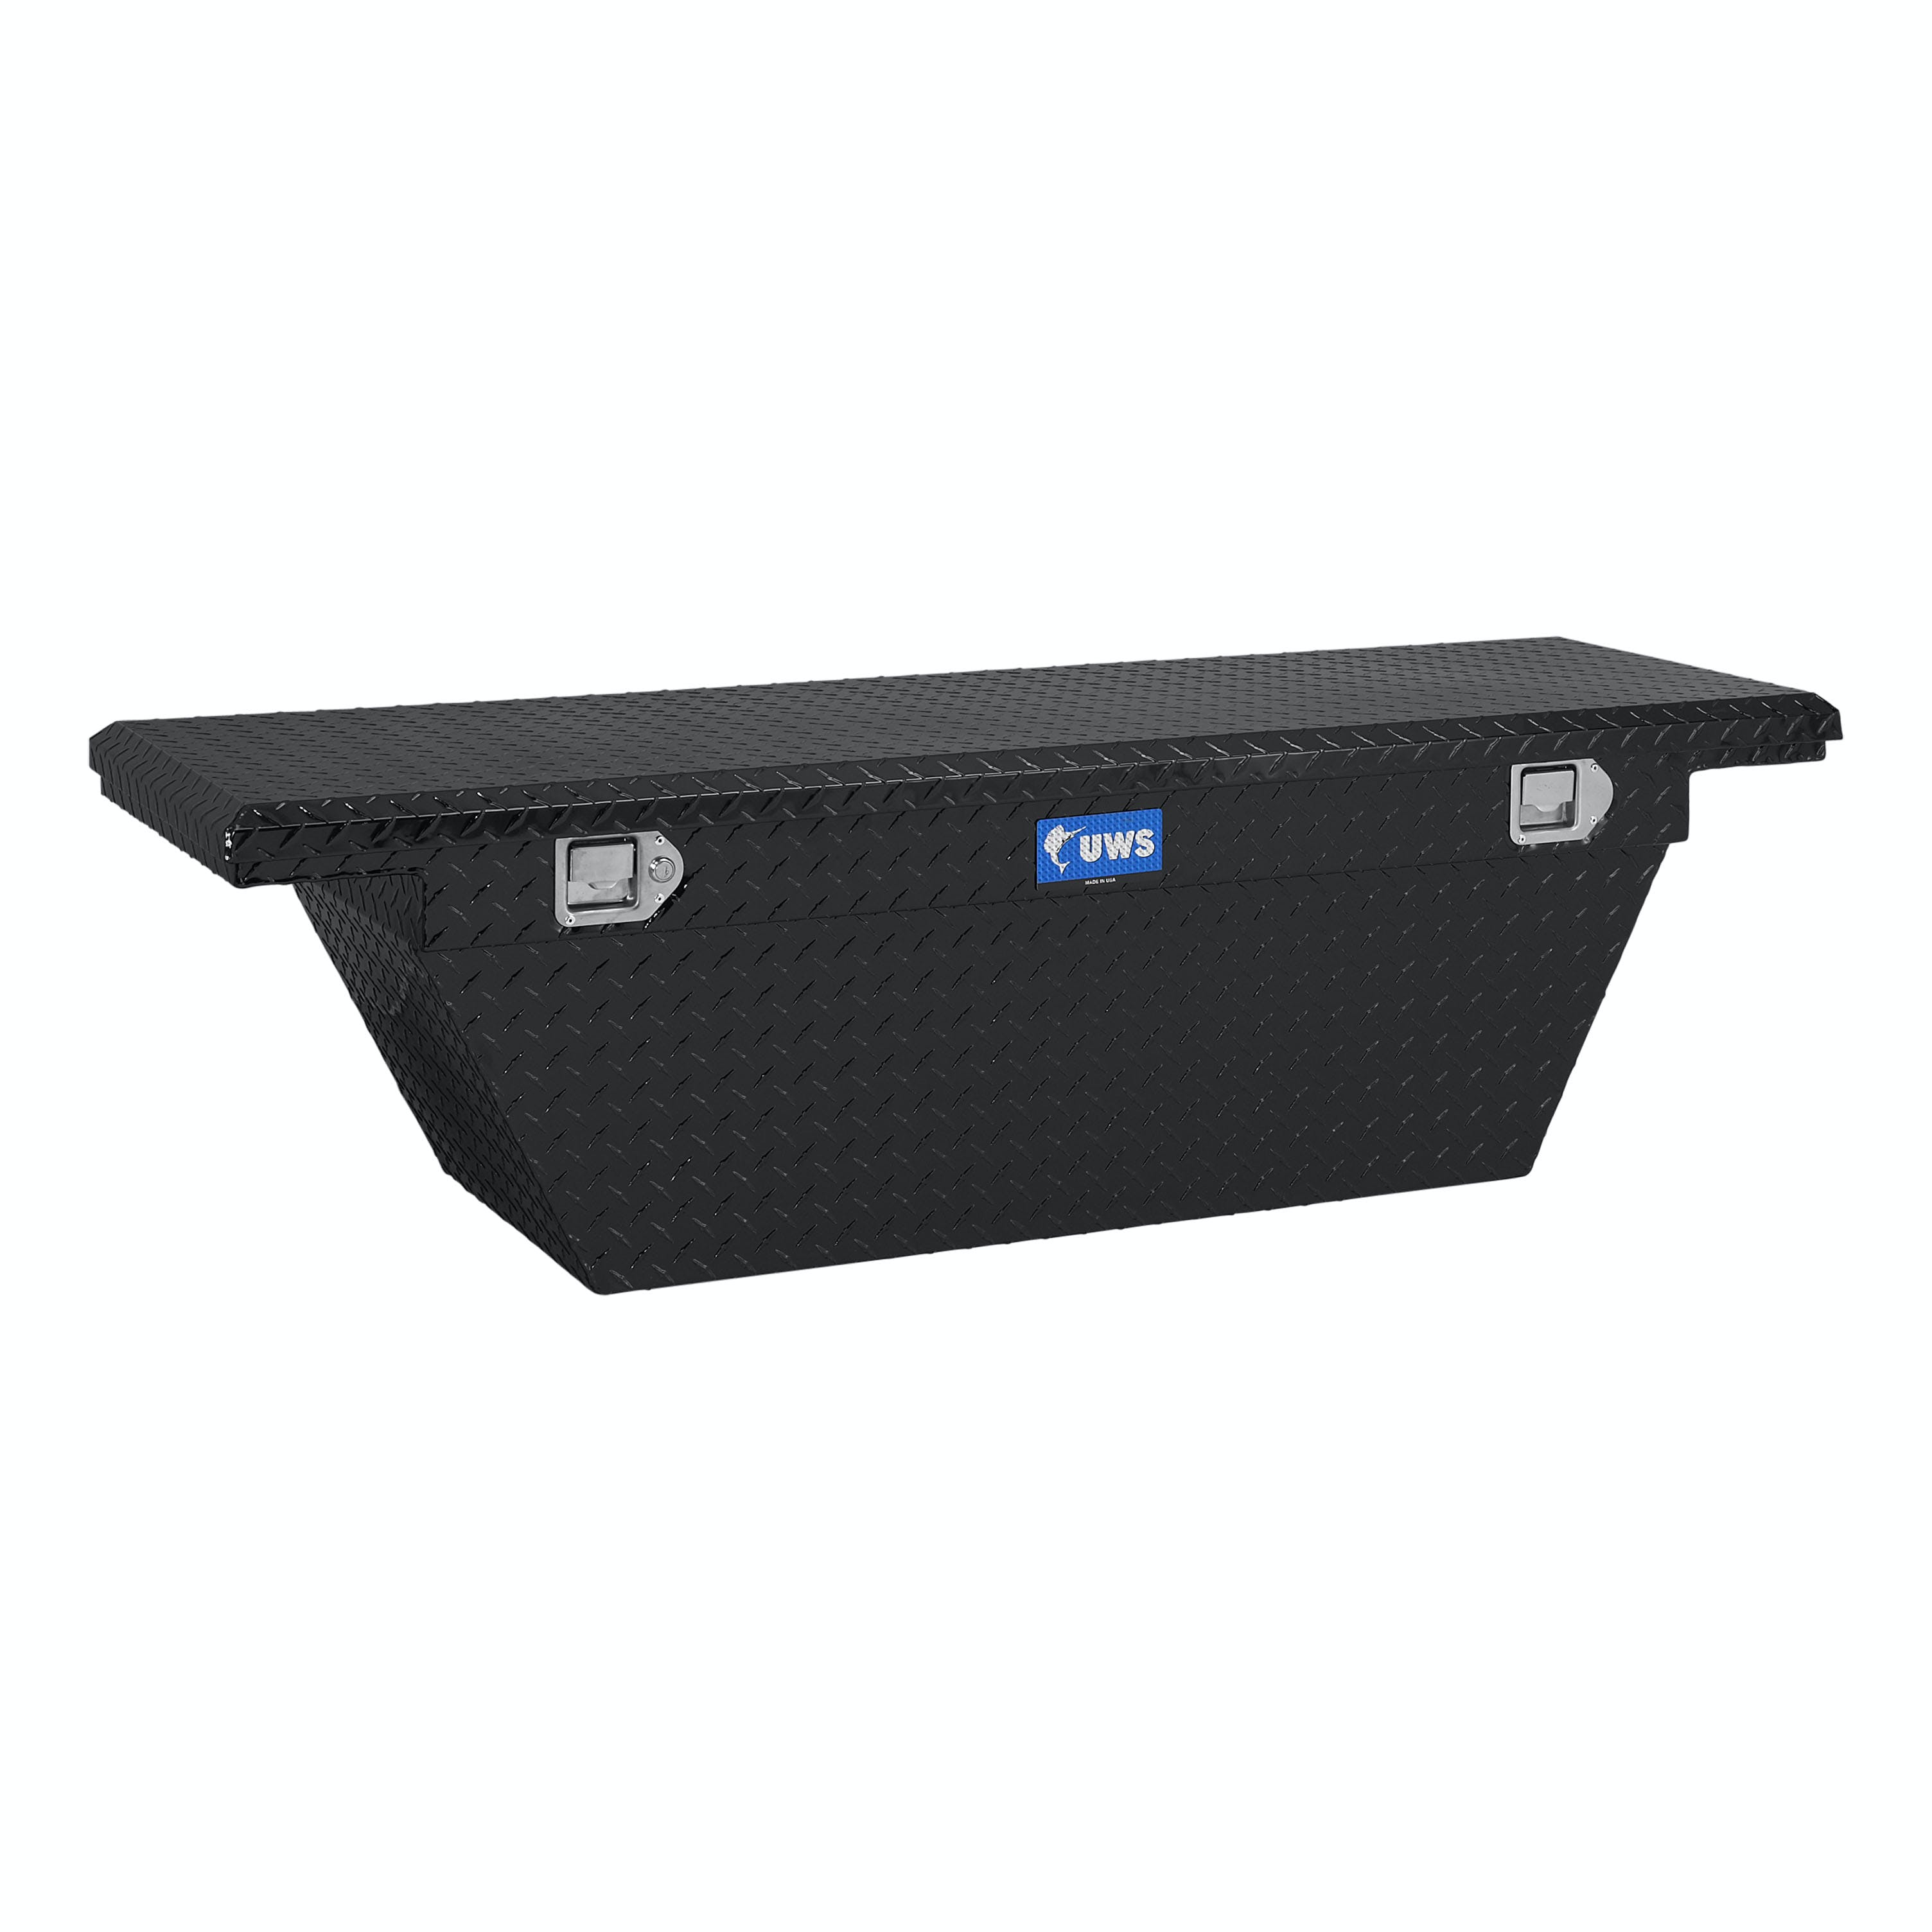 UWS TBSD-60A-LP-BLK 60 inch Aluminum Single Lid Crossover Toolbox Deep Angled Low Profile Black